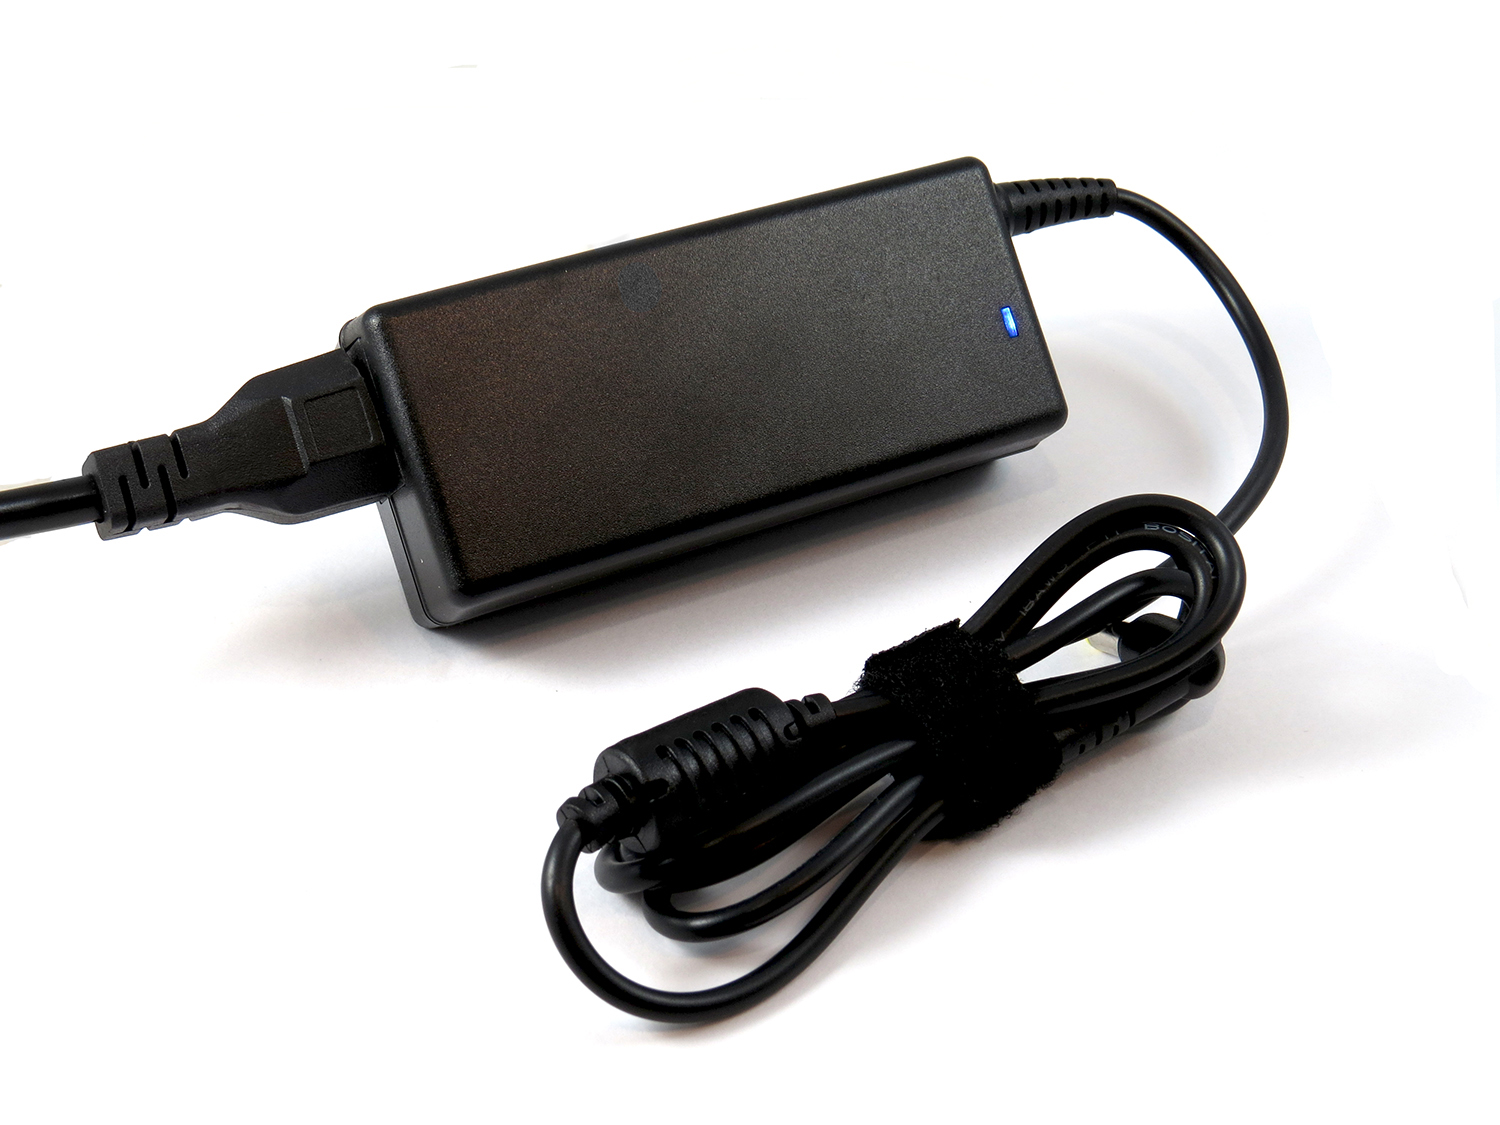 AMSK POWER AC Adapter for Samsung AD-4019, AD-4019P, CPA09-002, PA-1400-14, AA-PA2N40S, AD-4019W, AA-PA2N40L, BA44-00278A, AA-PA3NS40/US BA44-00279A - image 2 of 3